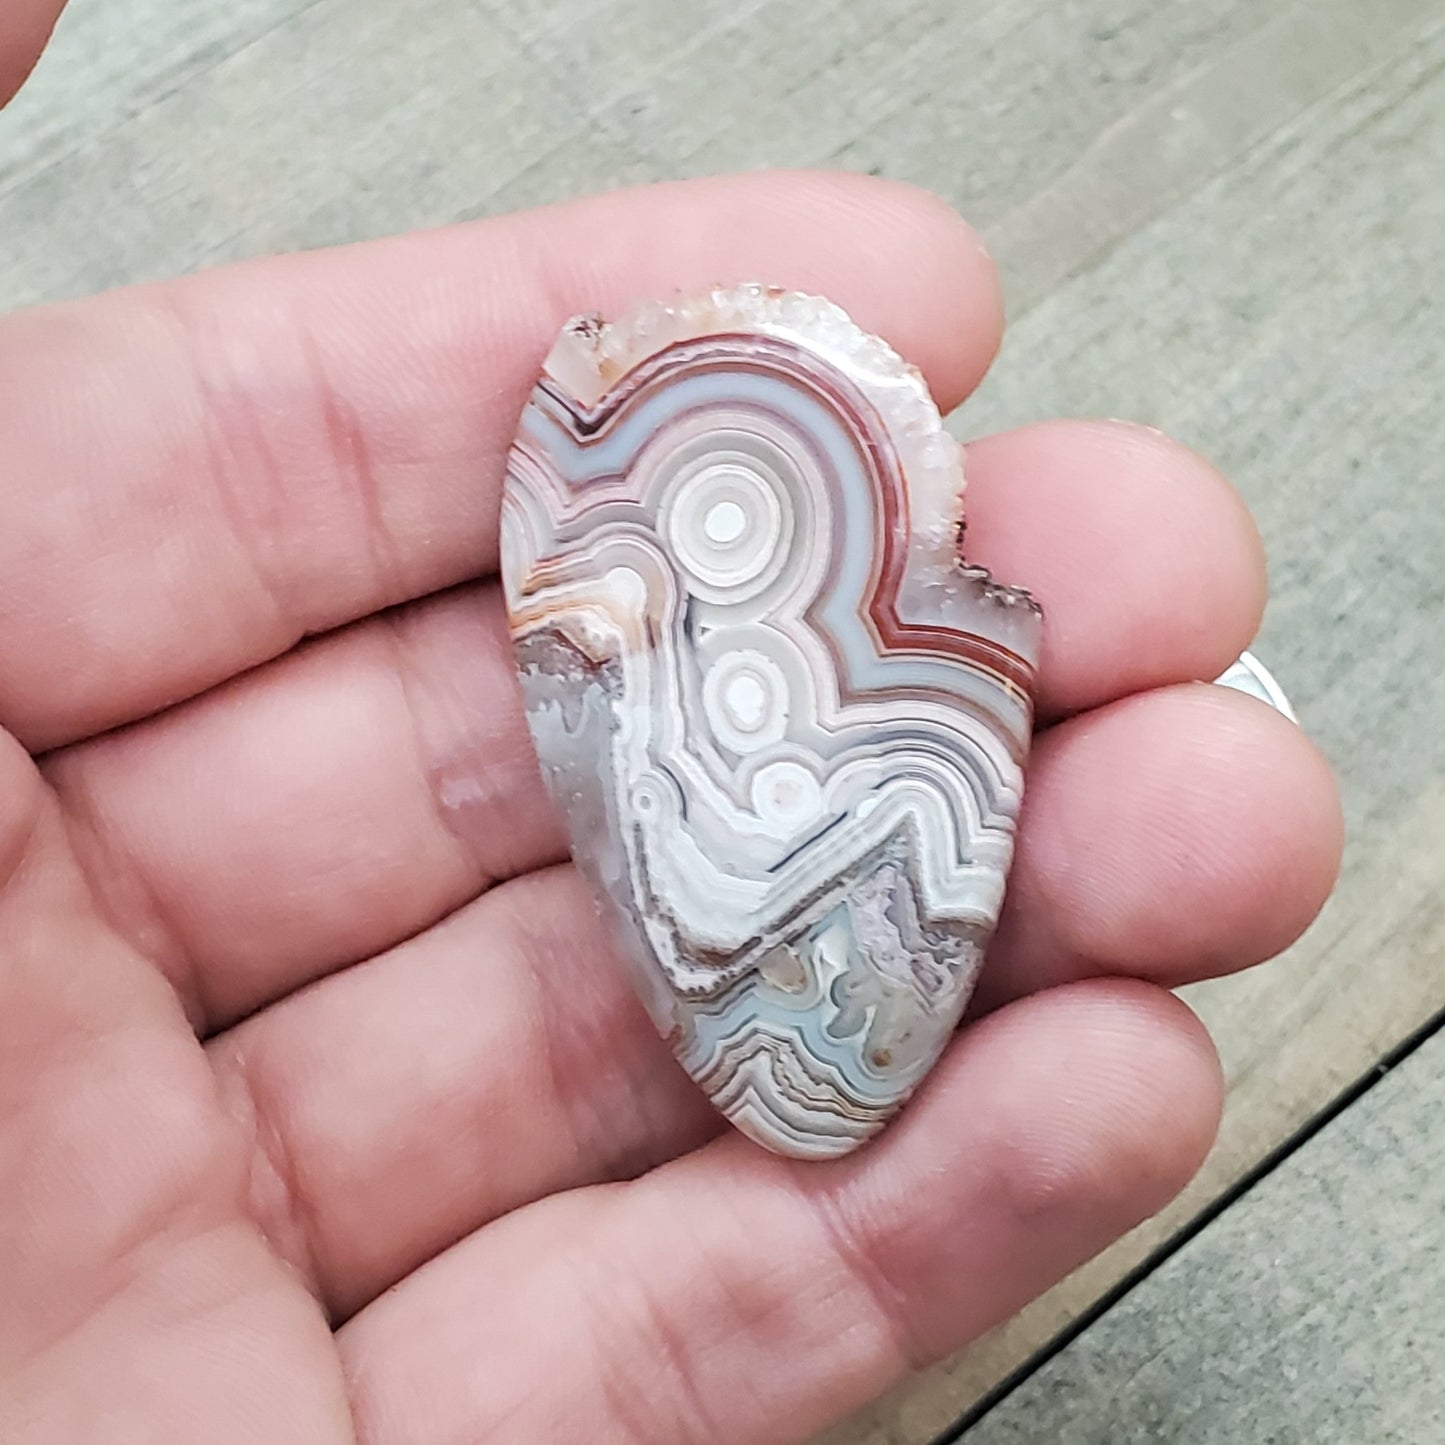 Crazy Lace Agate Druzy - Edge Cabochon - 62.5 carats - Earth & Hammer